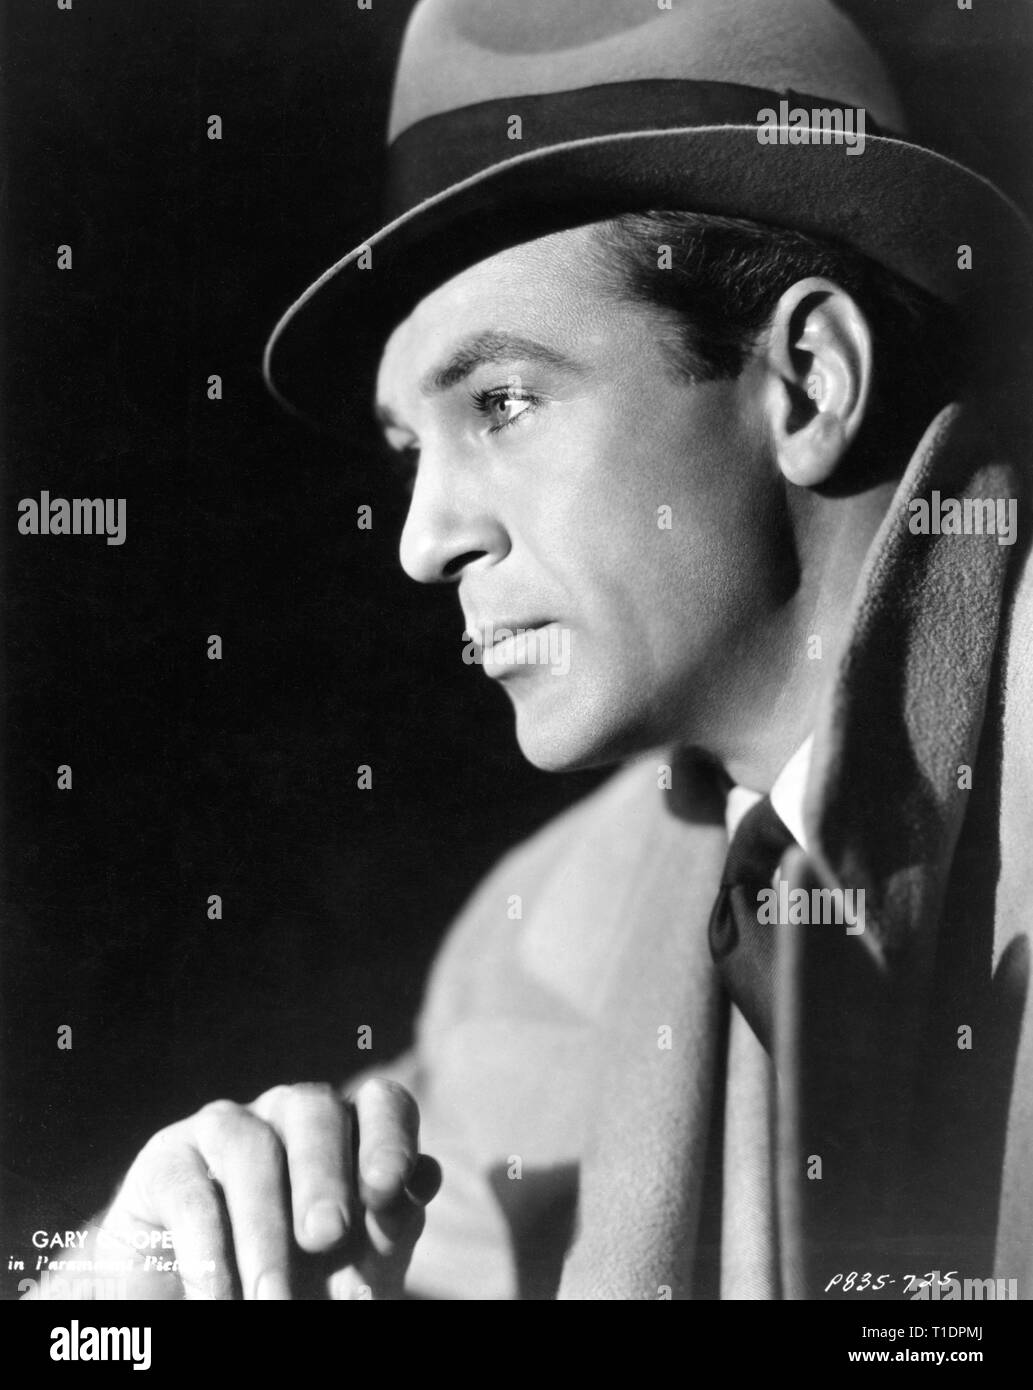 GARY COOPER 1933 Portrait Classical Hollywood Superstar Paramount Pictures Inc Stockfoto